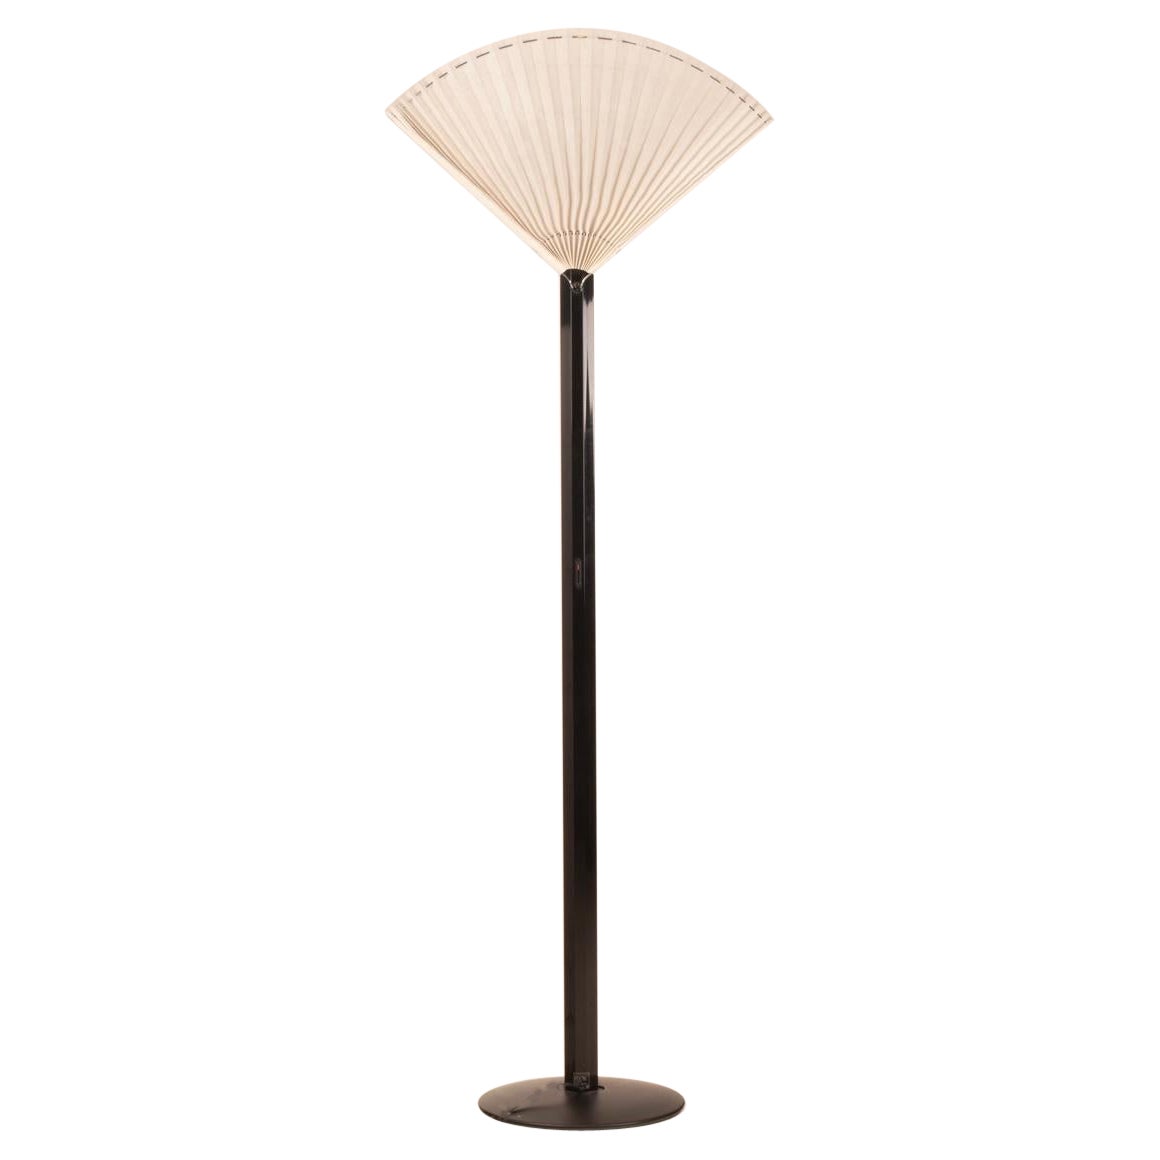 "Butterfly" floor lamp by Afra and Tobia Scarpa for Flos